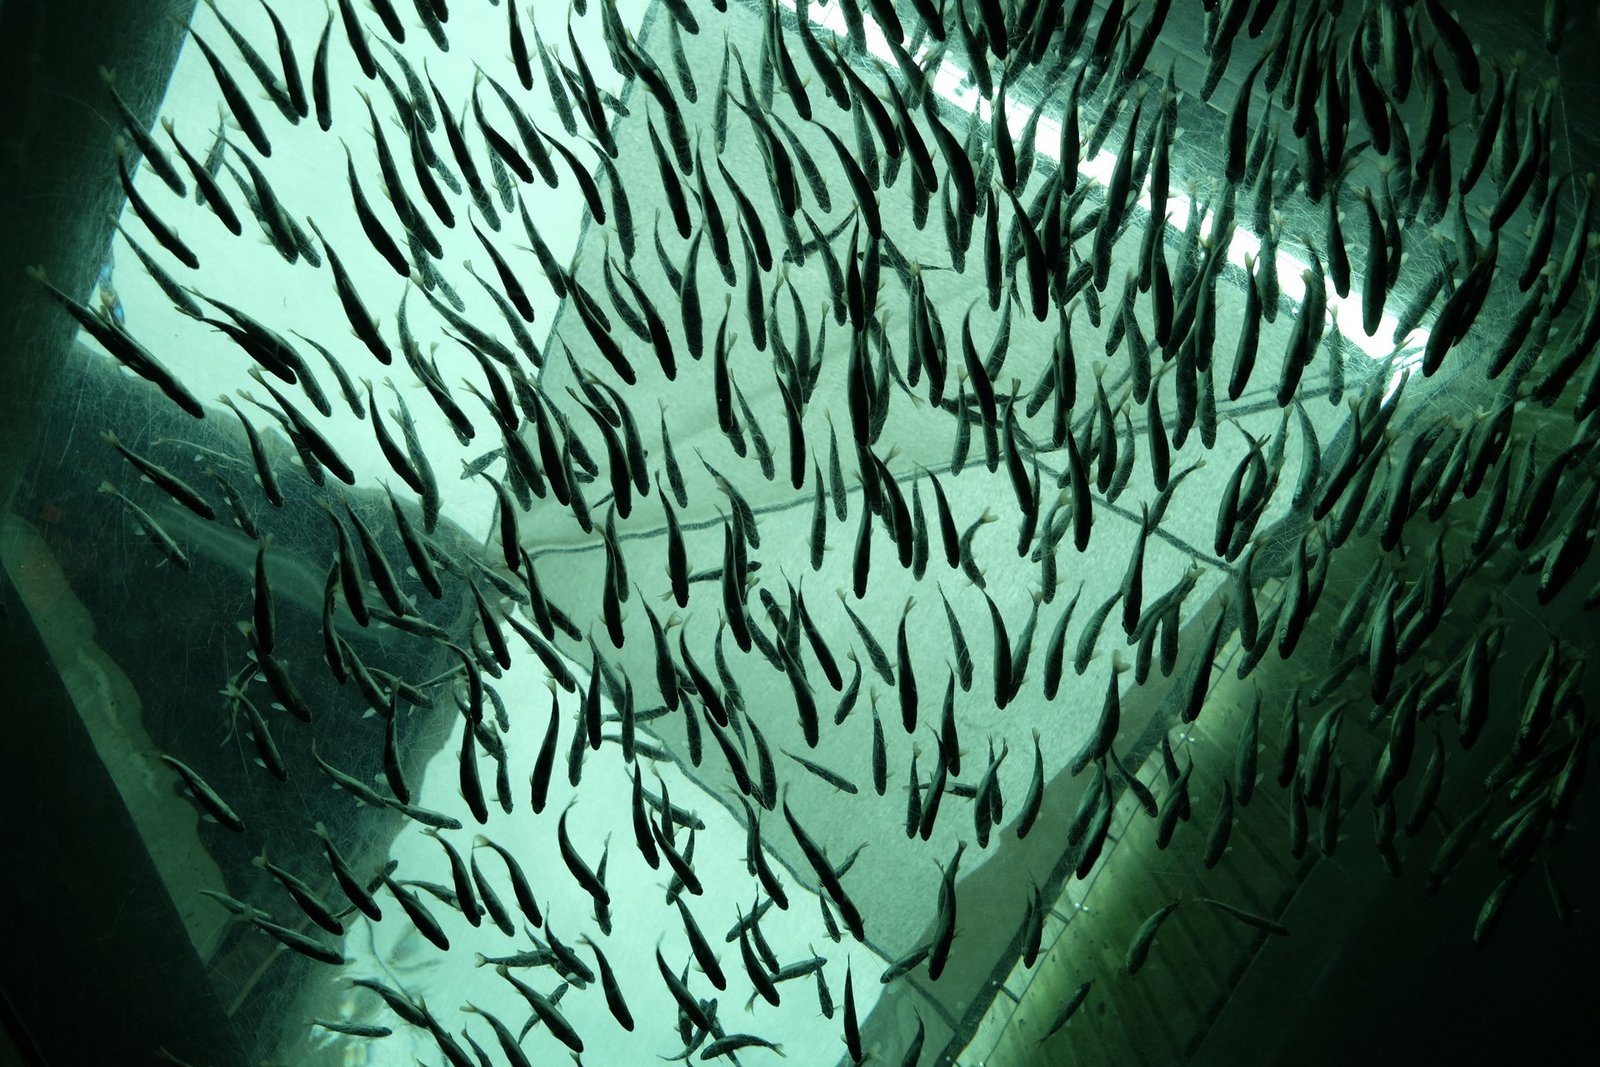 Fishes swimming in a fish farm